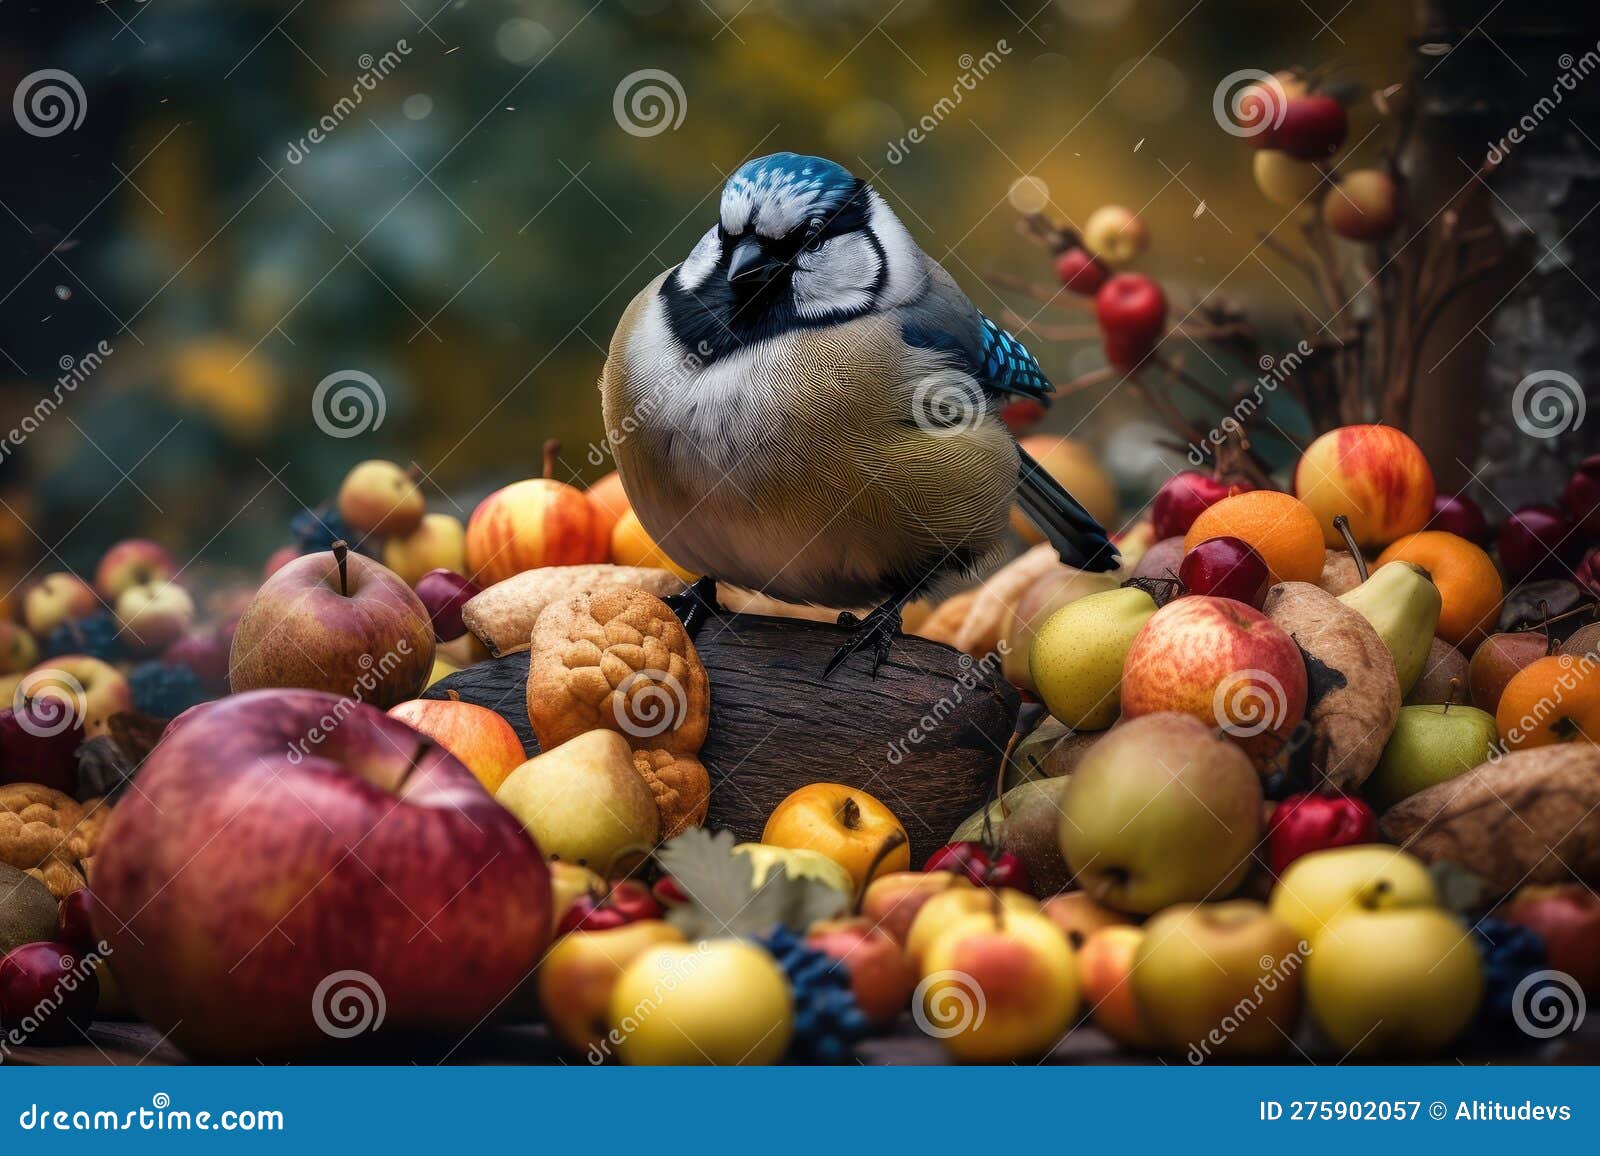 morbidly obese bird, surrounded by bountiful feast of fruits and nuts